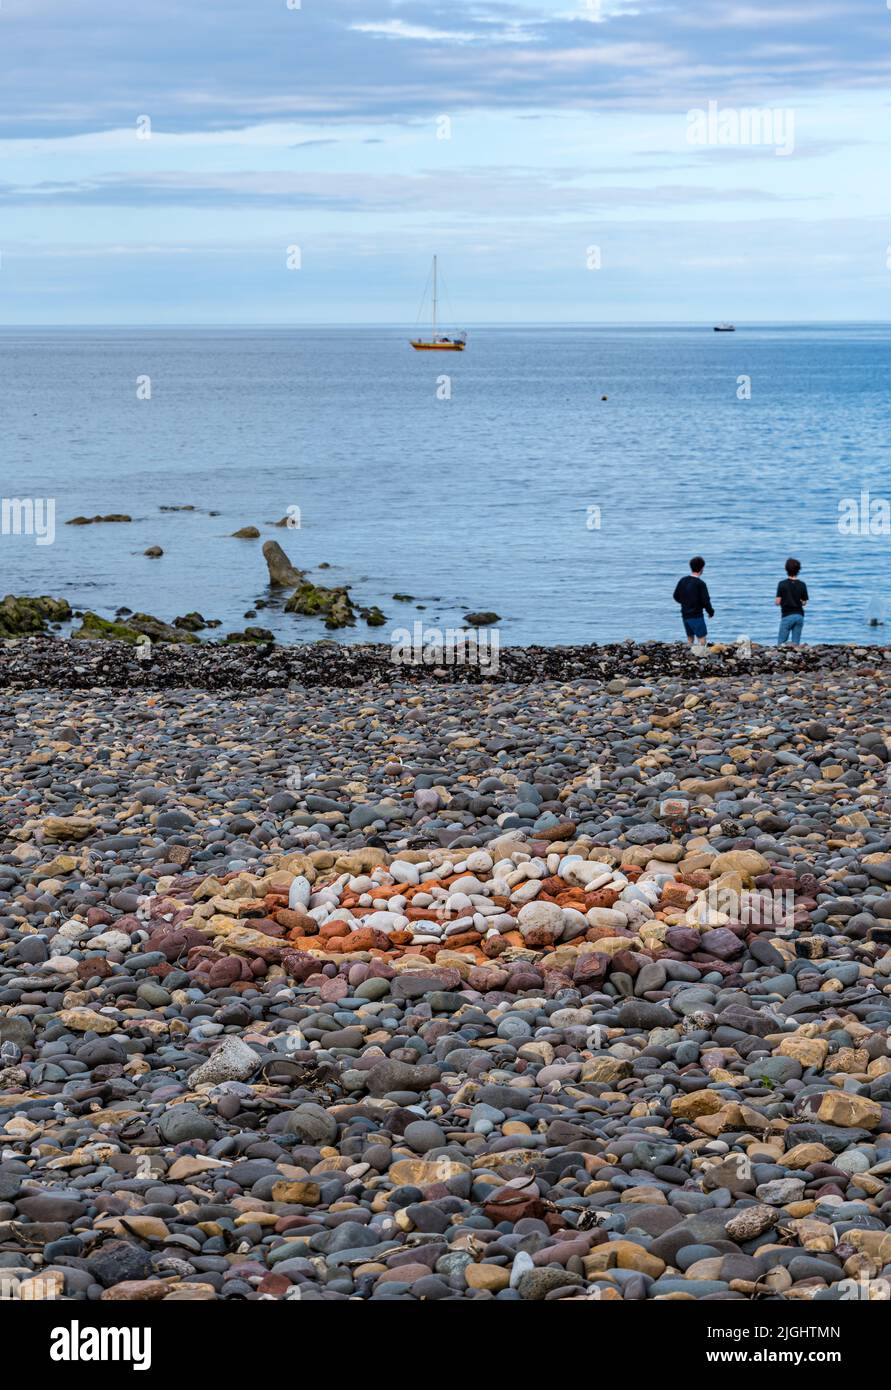 Stone or rock land art pattern or artwork on beach with yacht at sea and boys skimming stones, Berwickshire, Scotland, UK Stock Photo